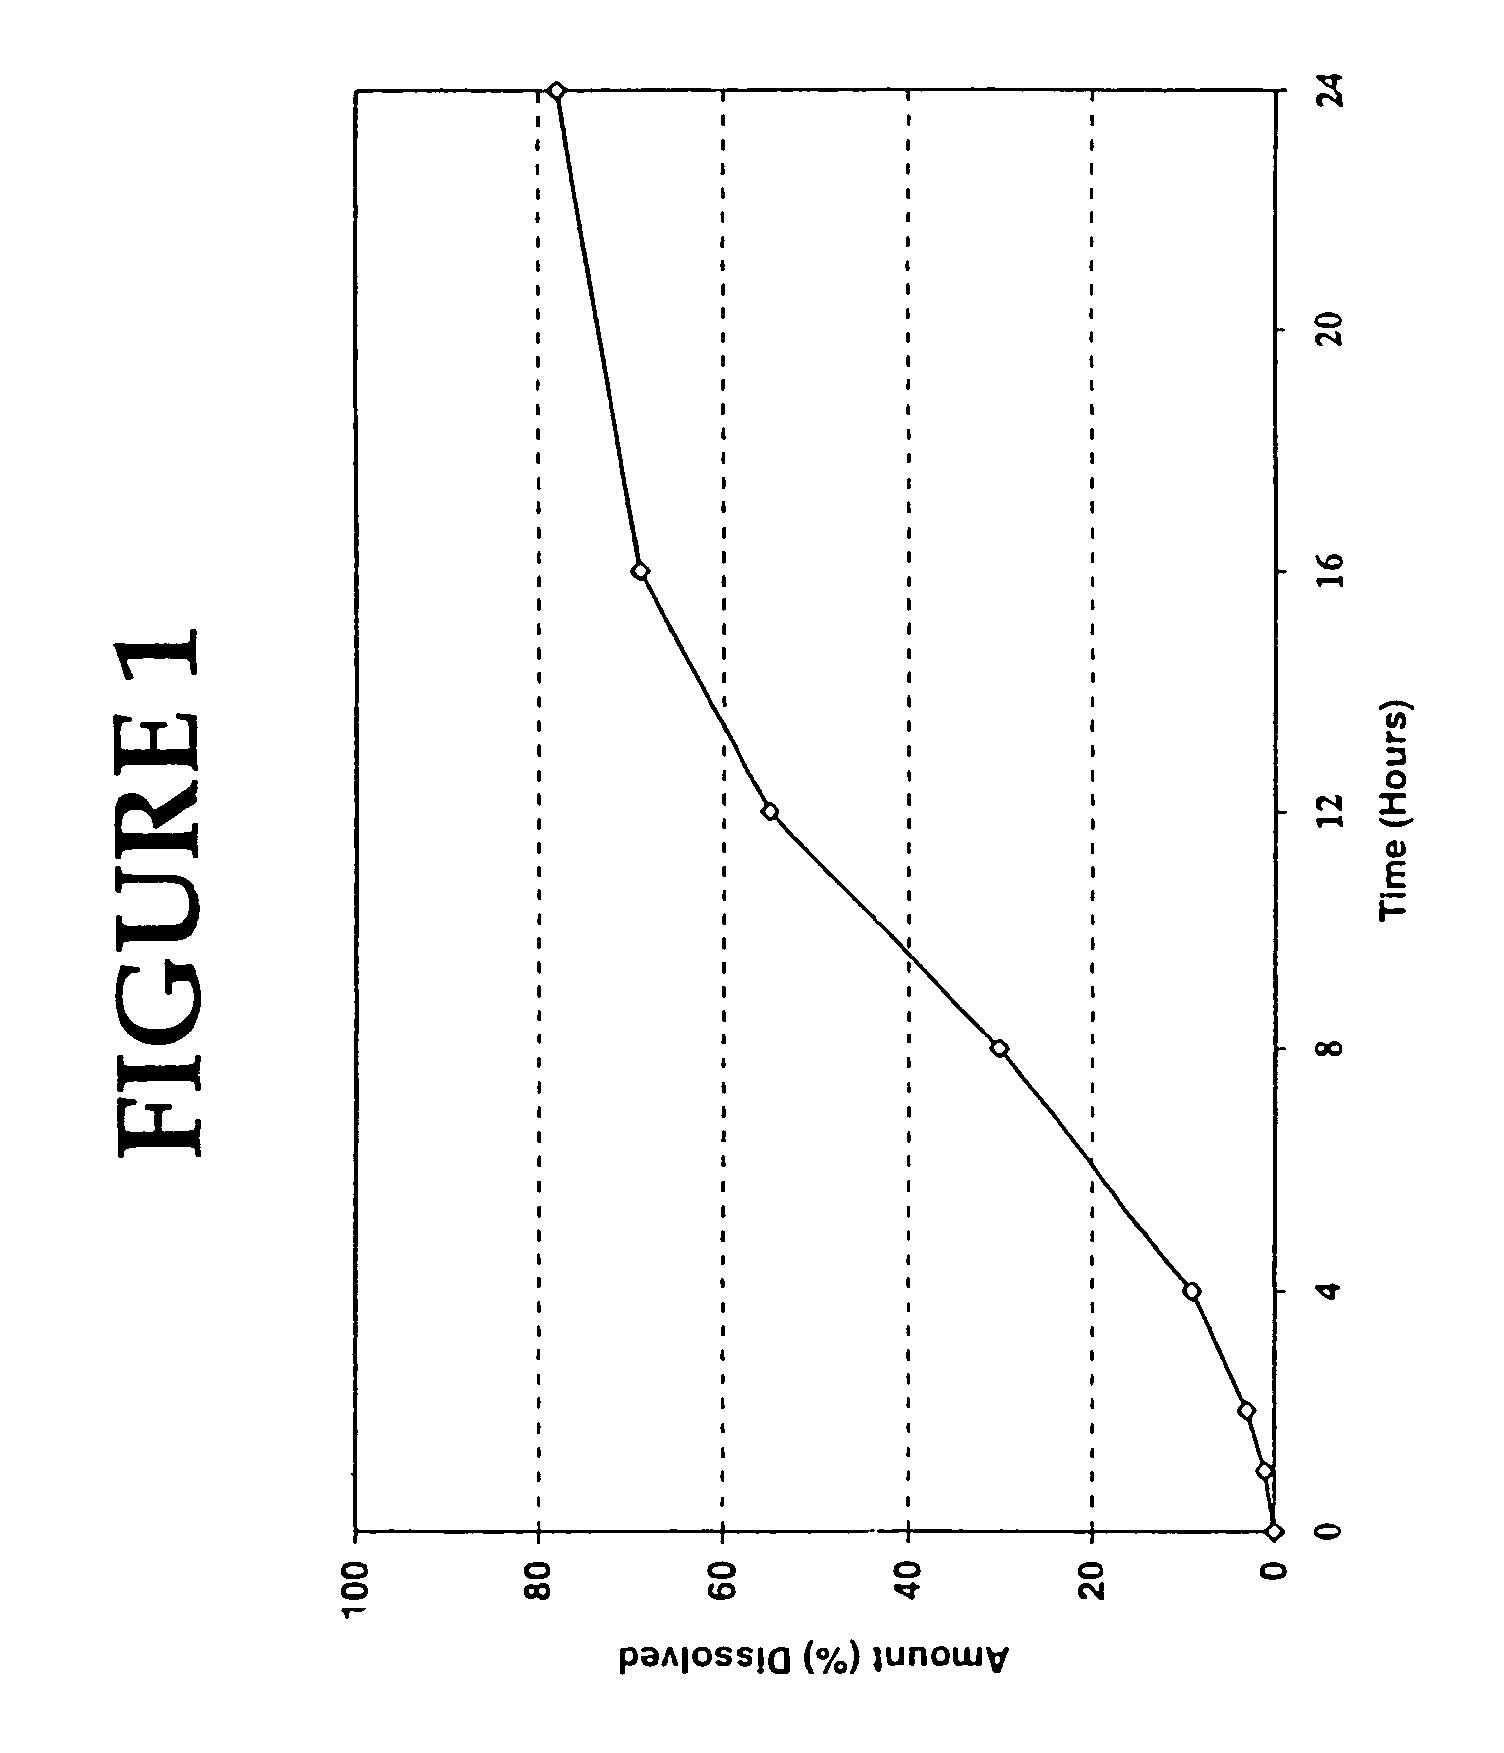 Diltiazem controlled release formulation and method of manufacture